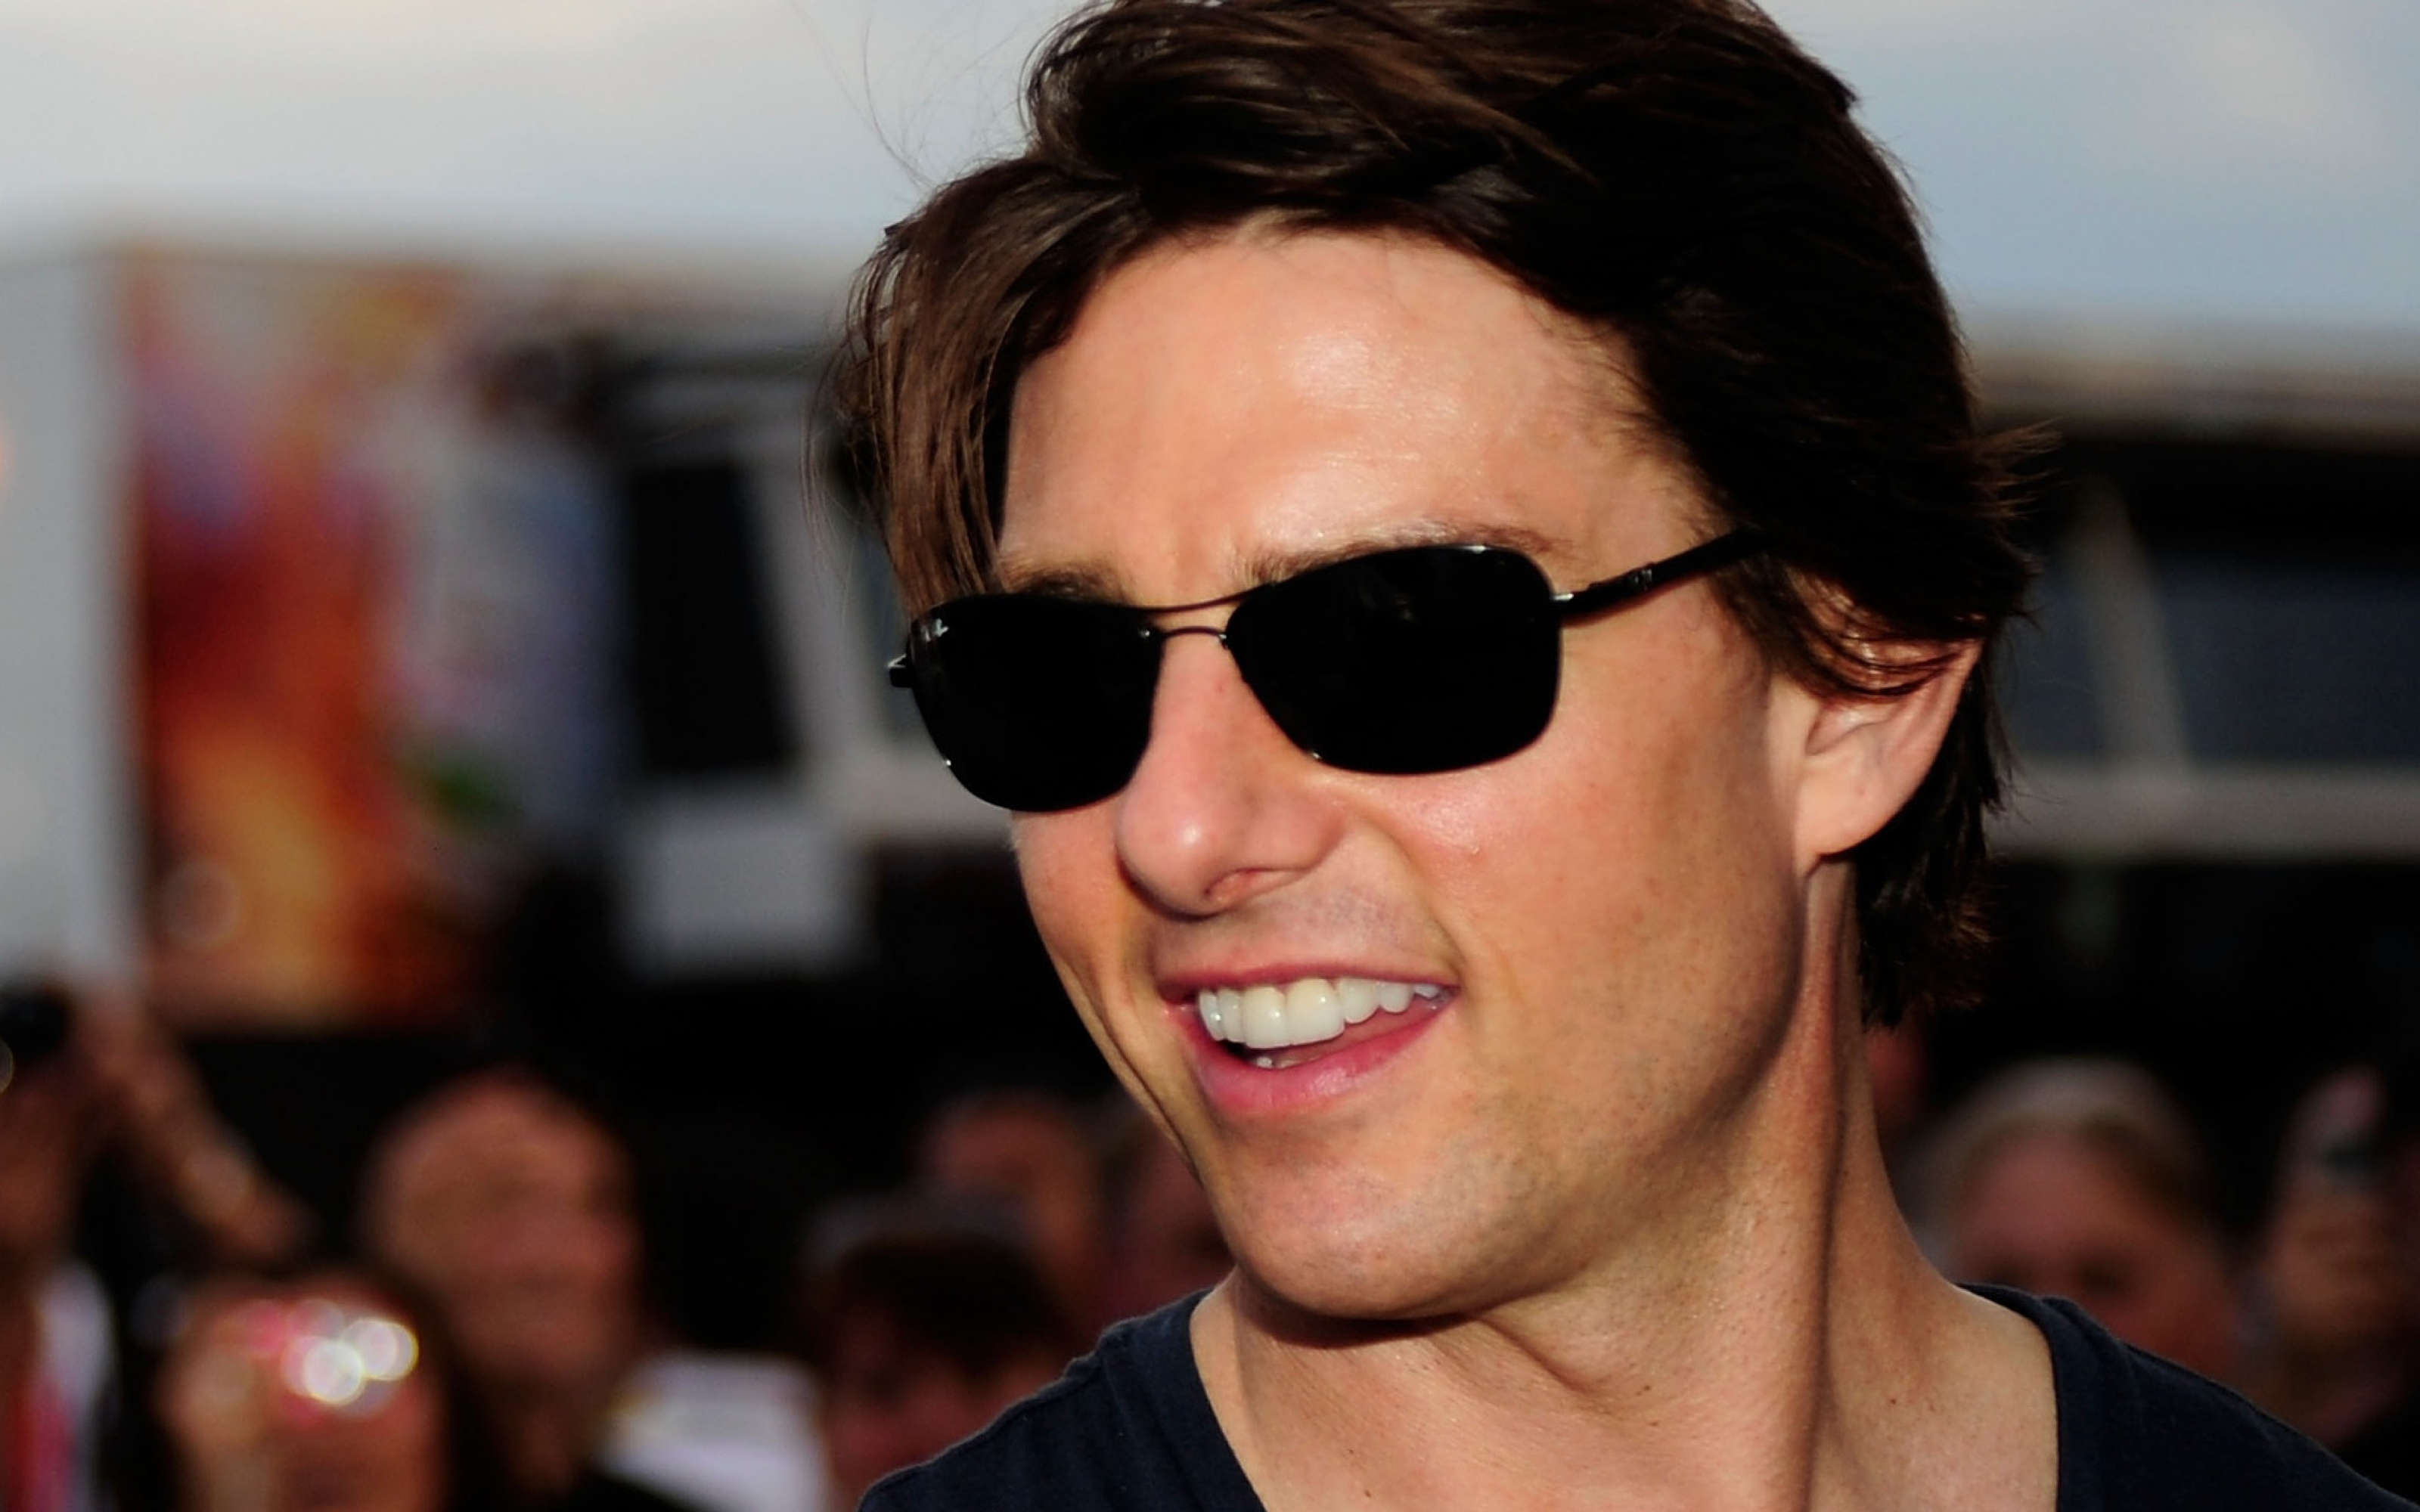 Celebrity Tom Cruise HD Wallpaper Background Image. 